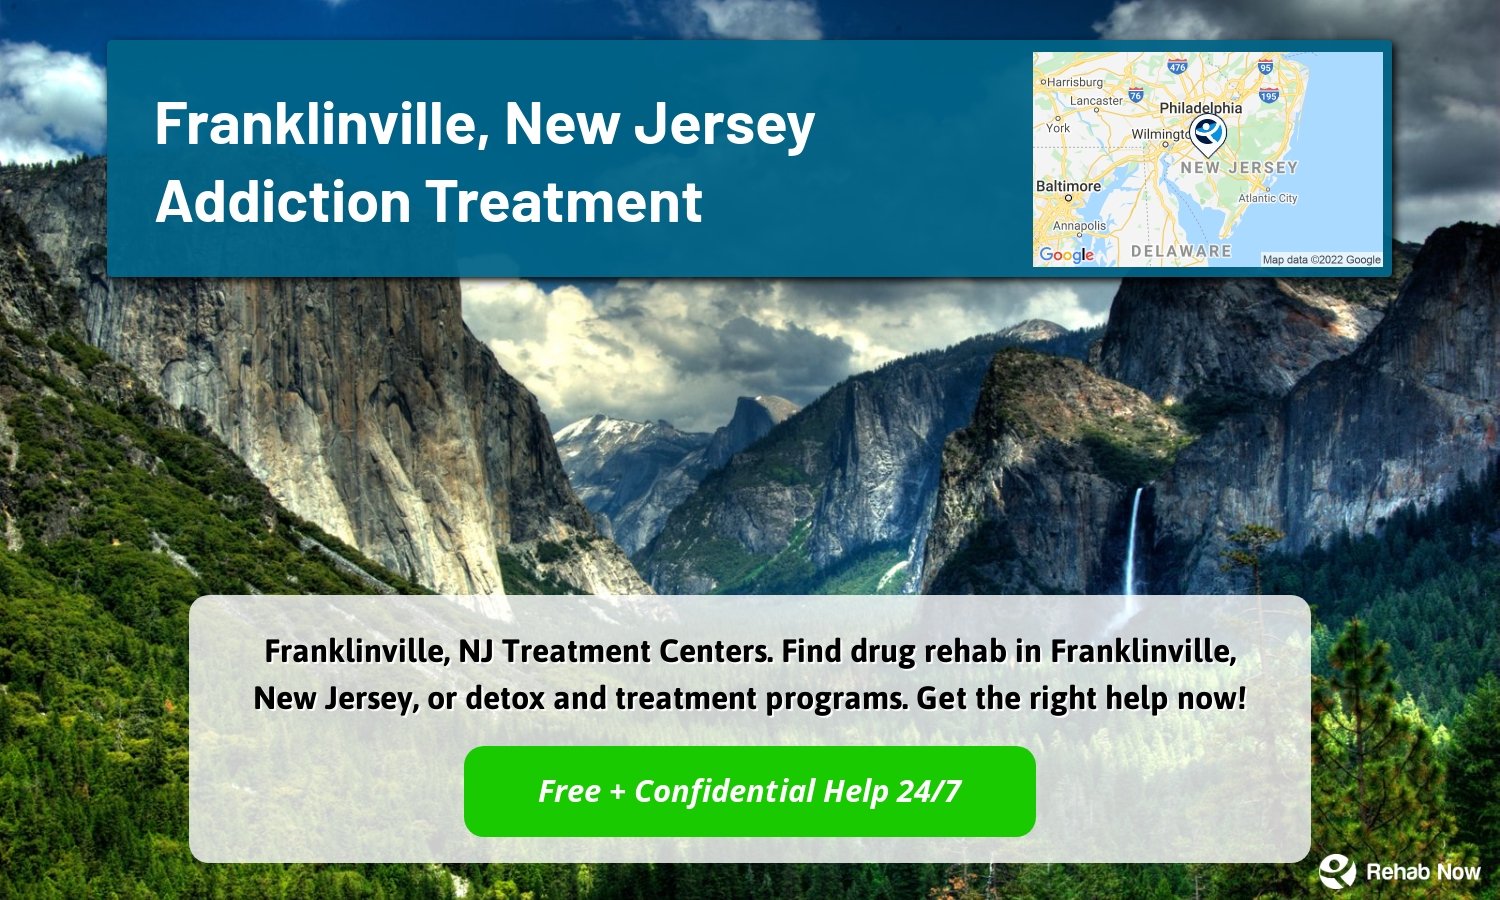 Franklinville, NJ Treatment Centers. Find drug rehab in Franklinville, New Jersey, or detox and treatment programs. Get the right help now!